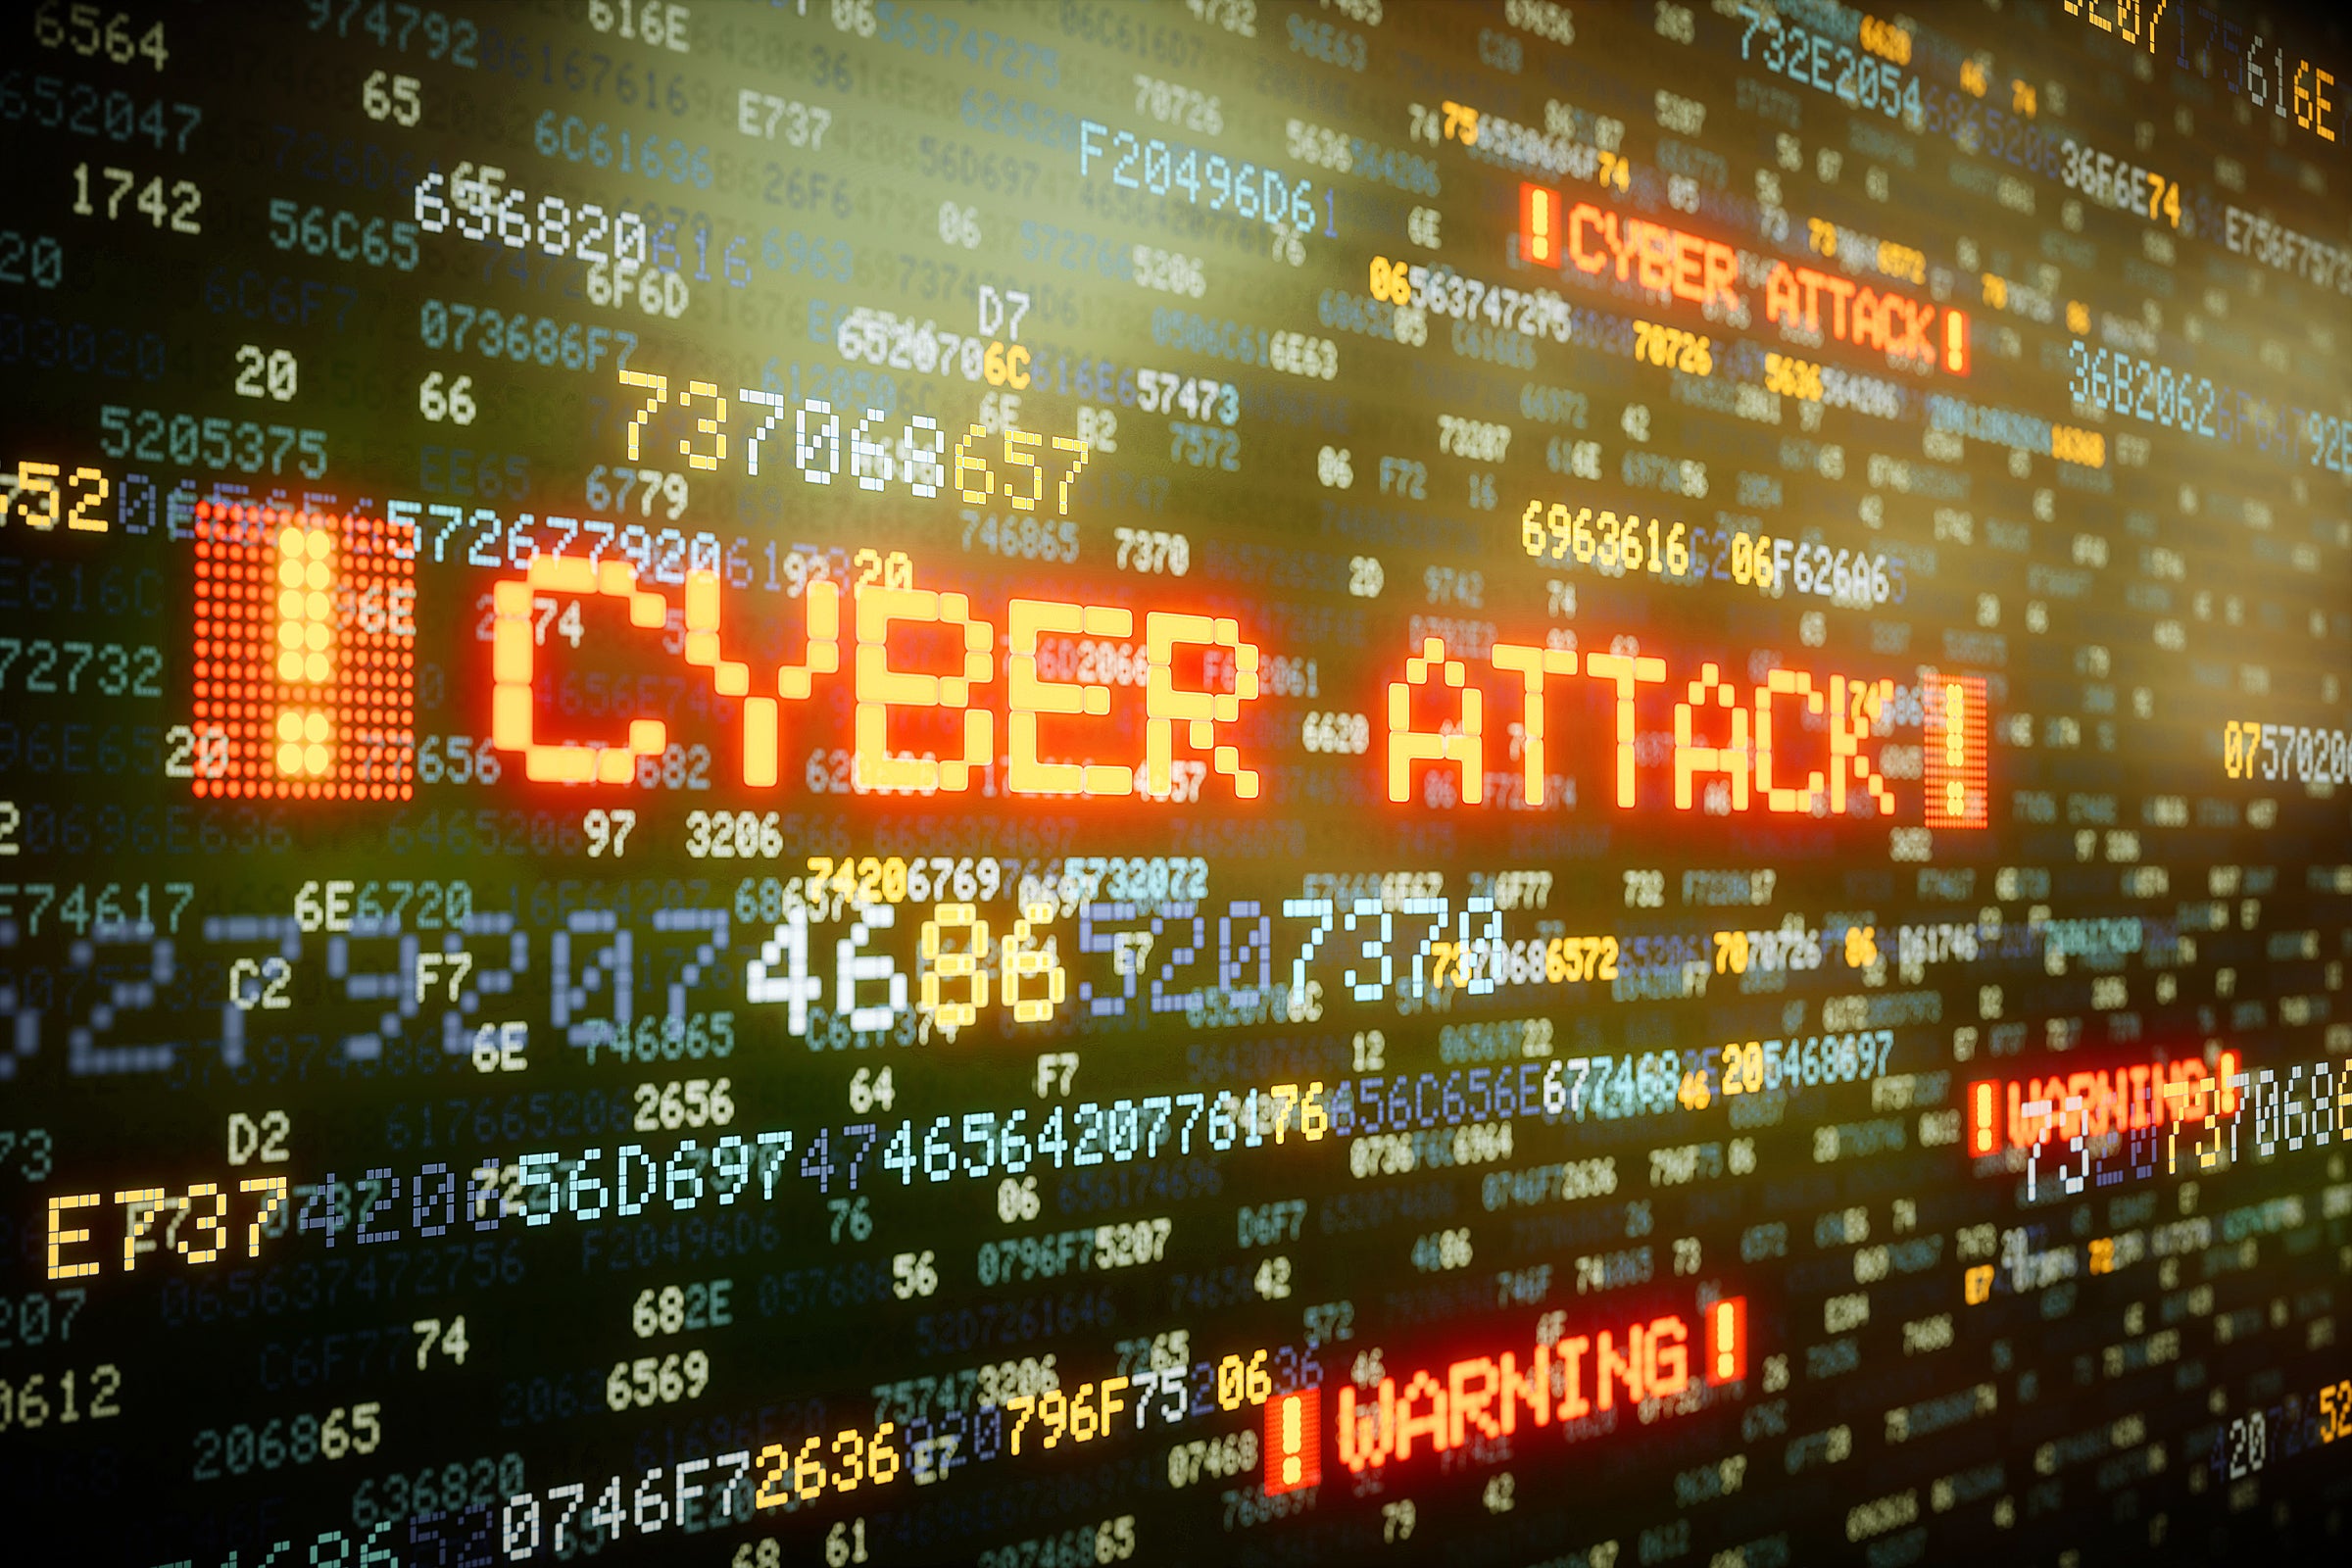 Analyzing Recent Cybersecurity Attacks and Data Breaches